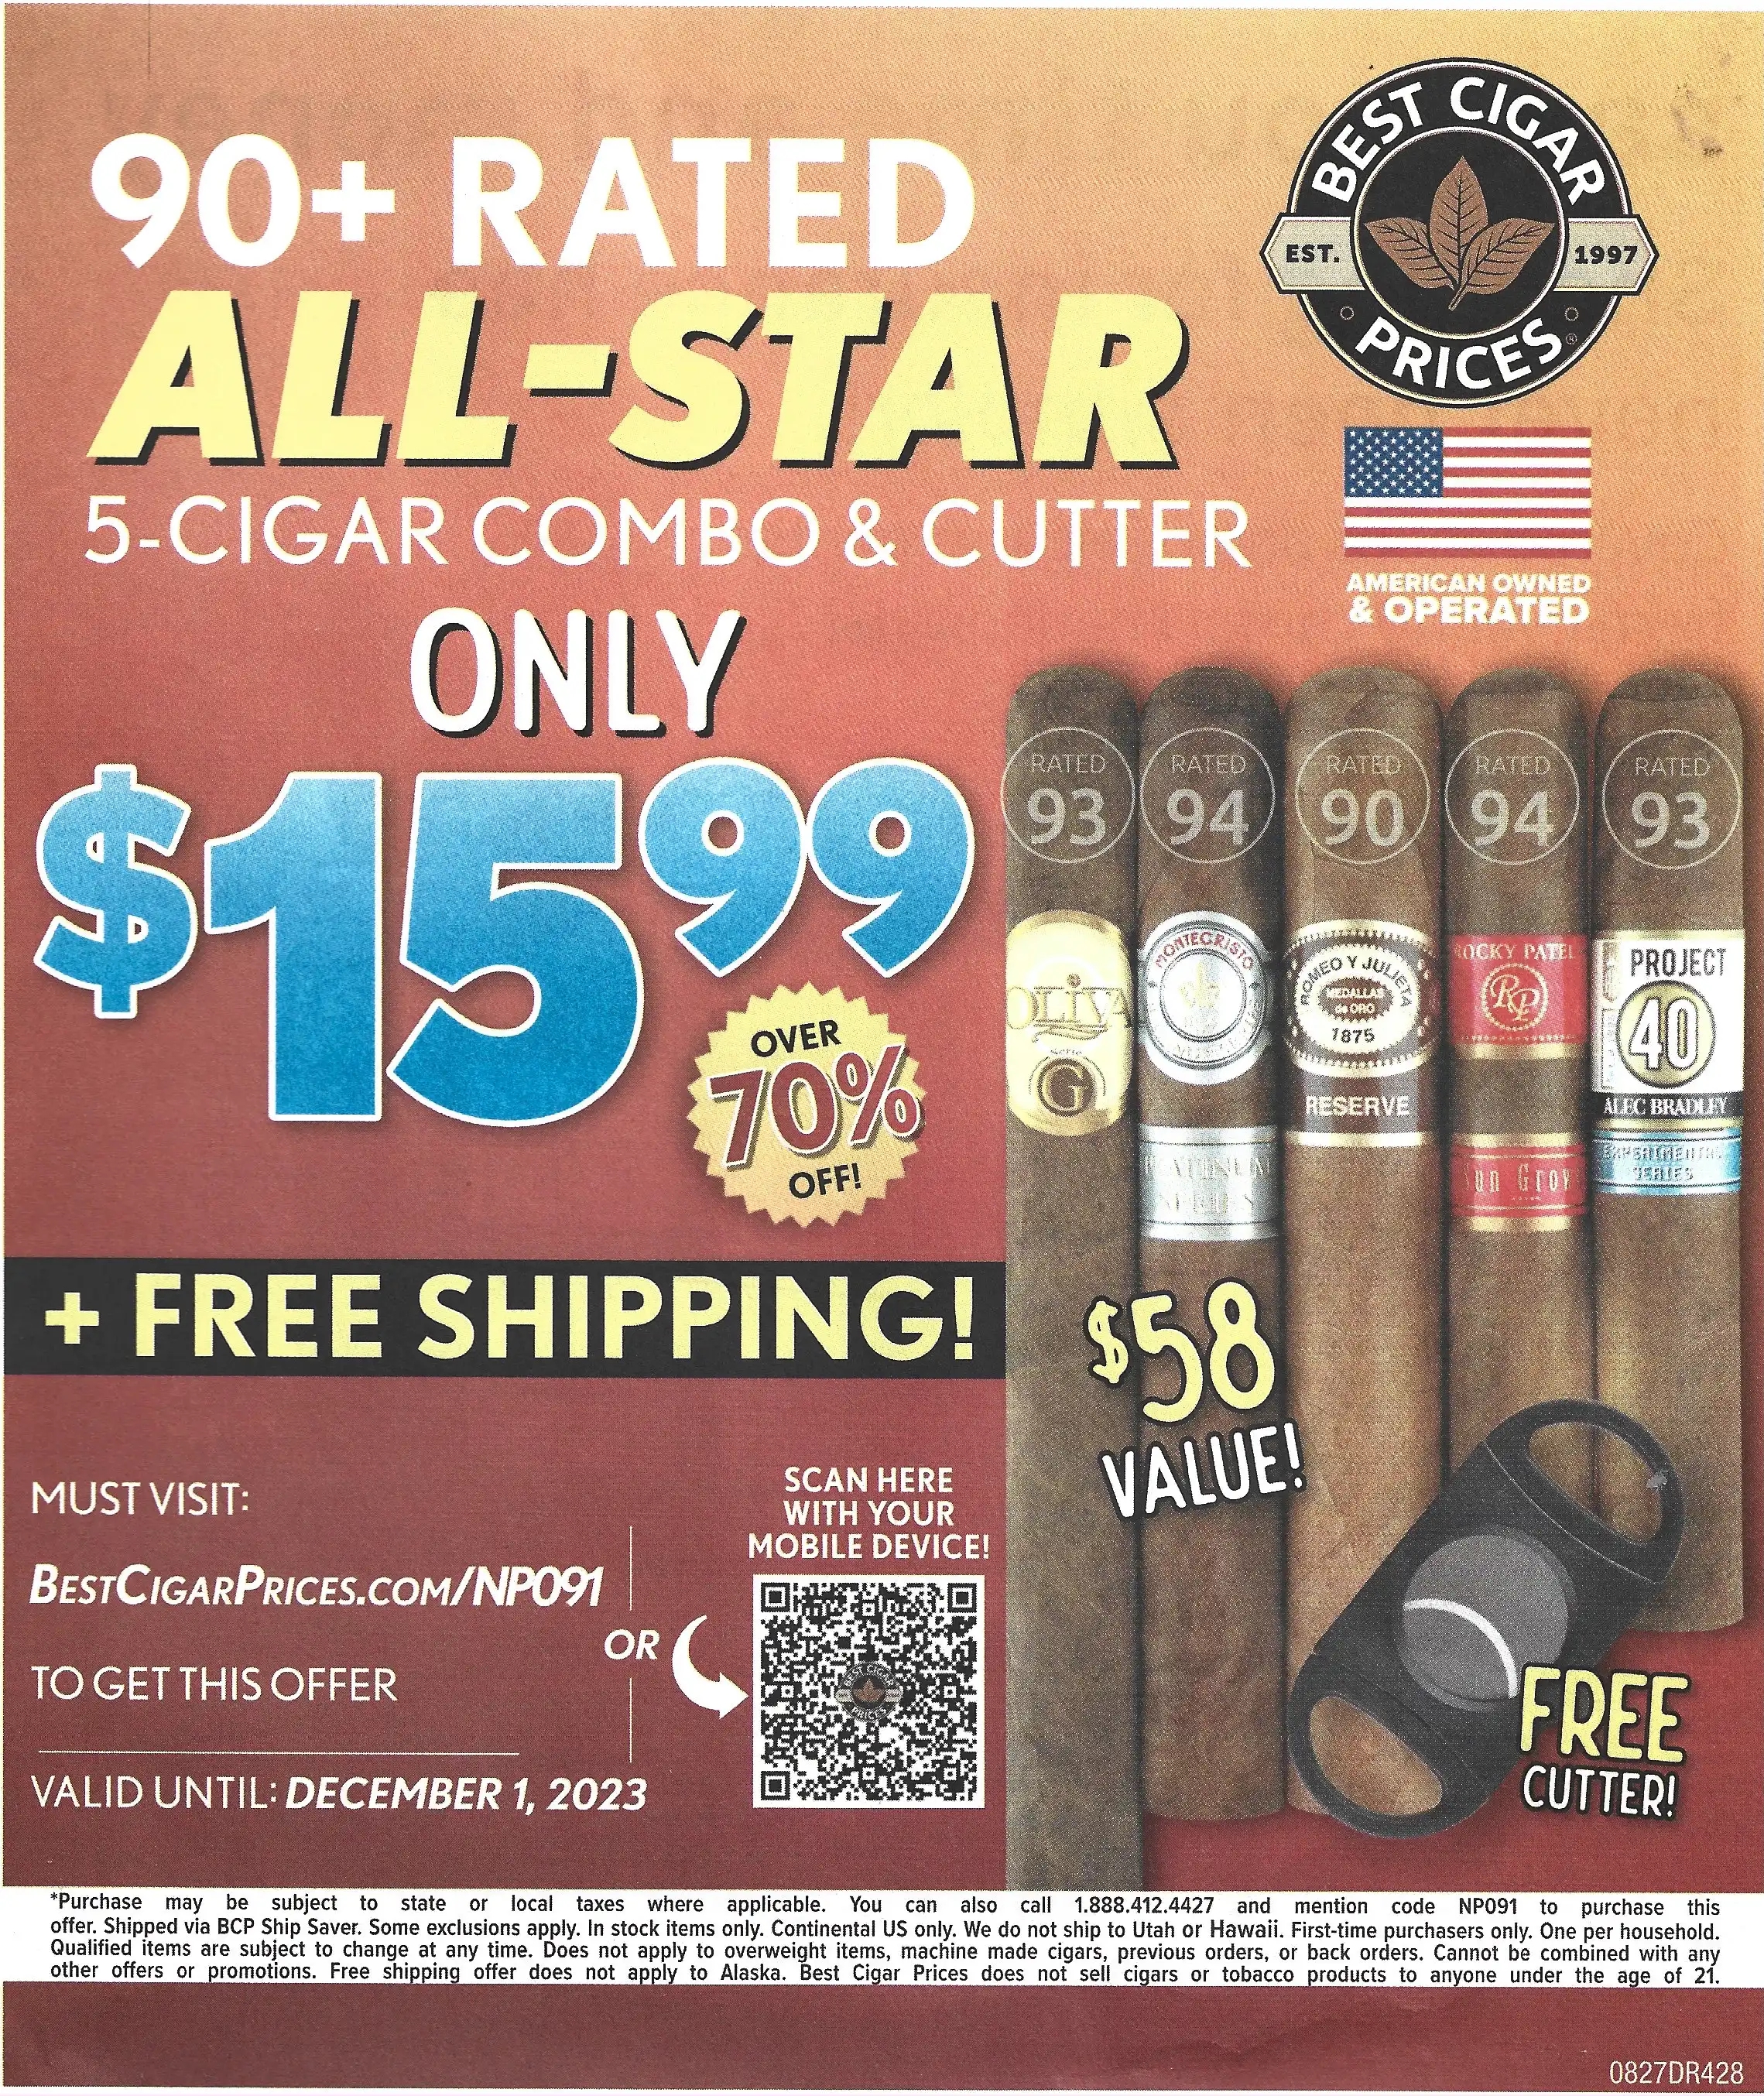 BestCigarPrices.com All-Star 5-Cigar Comb Pack Promo Code - Expires 12/01/2023